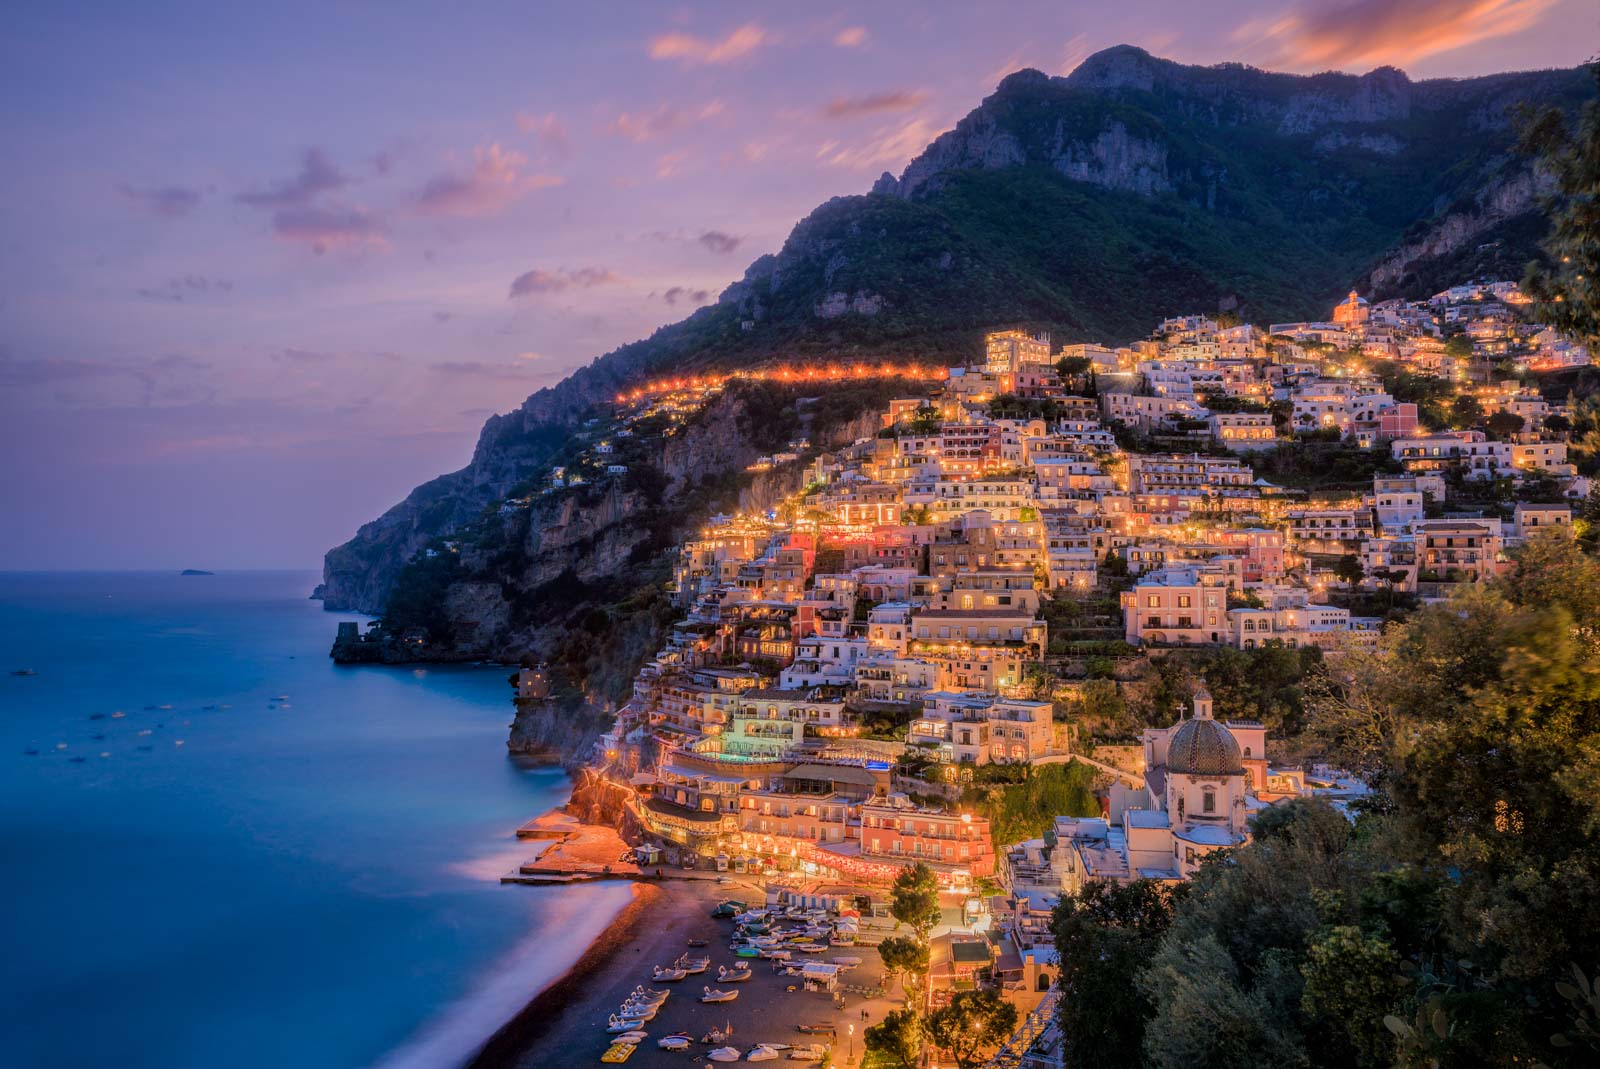 Where to Stay in Positano: Top Positano Hotels for Any Budget